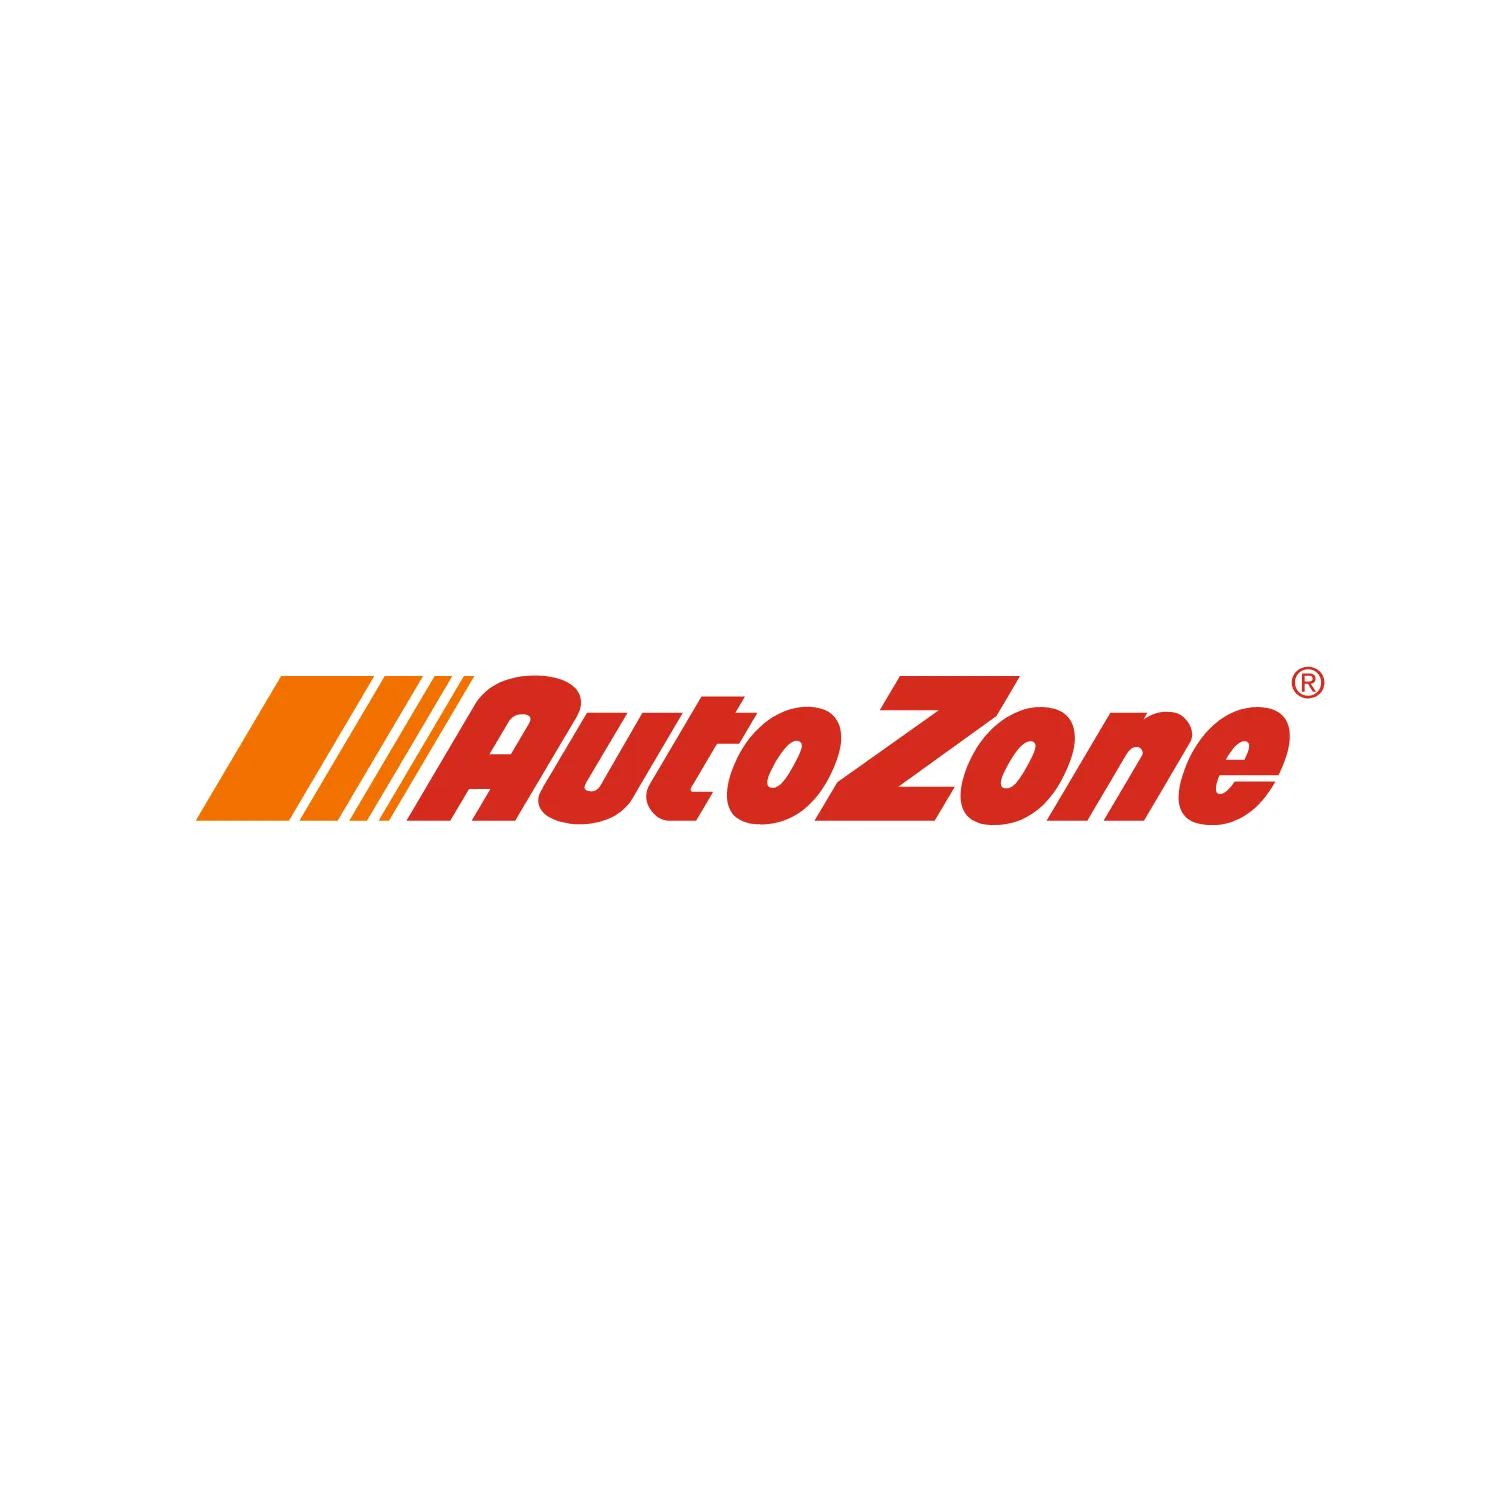 Database of AutoZone Locations in the United States